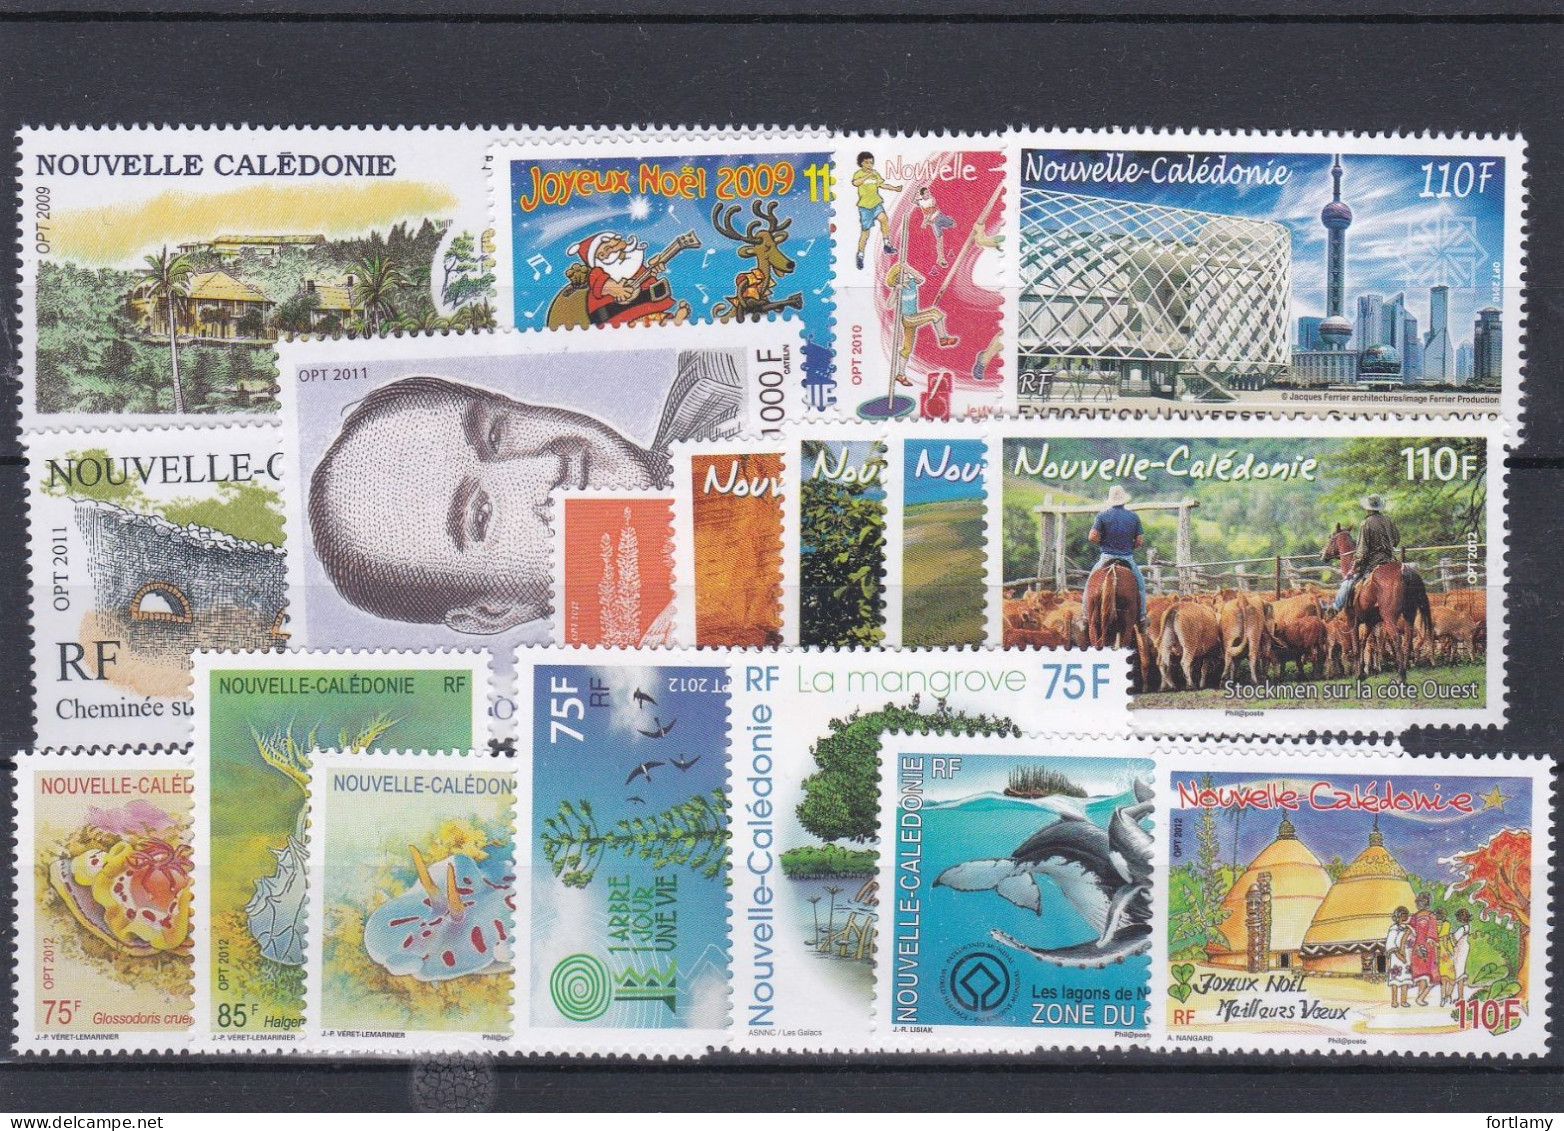 LOT 478 NOUVELLE CALEDONIE N° 1084-1090-1104-1101-1137-1140-1147-1154-1155-1156-1157-1148-1165-1166-1167-1167 ** - Collections, Lots & Series